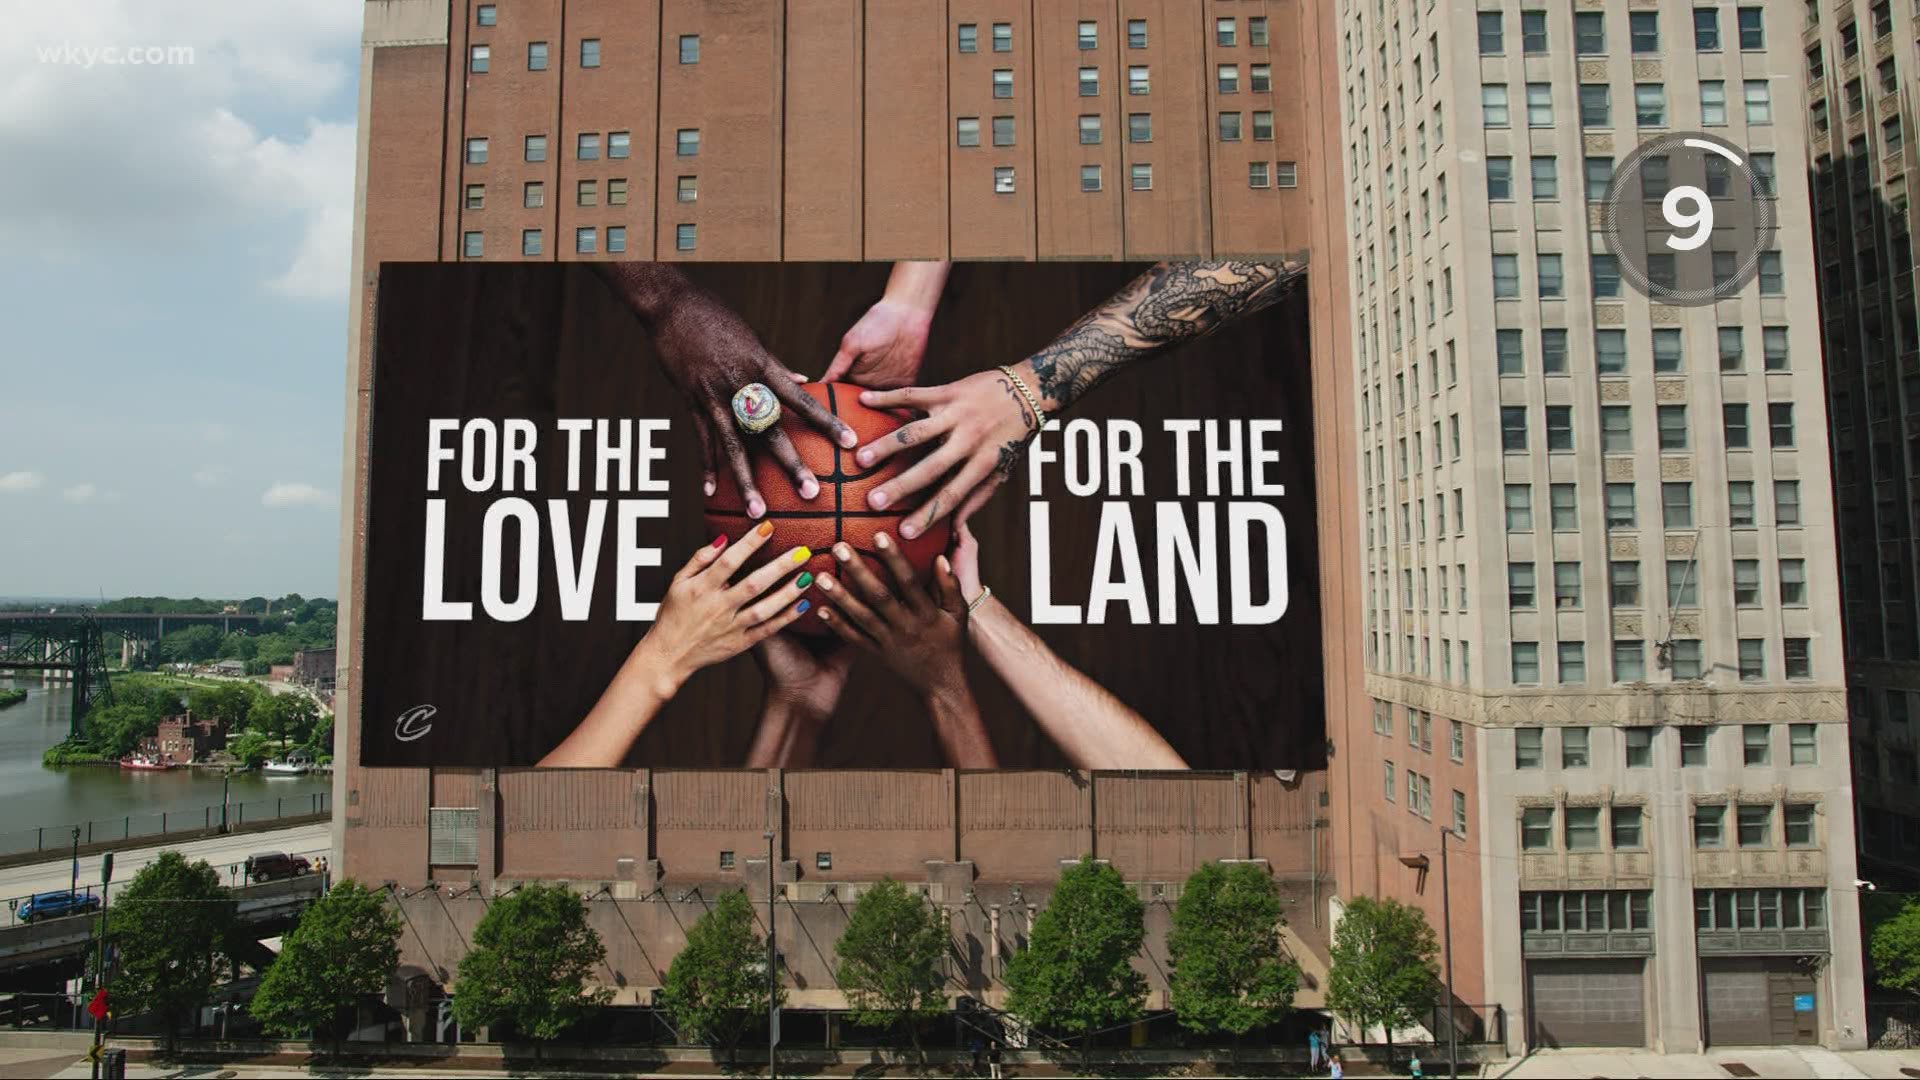 The Cavs will present their proposal for the new banner at Friday's City Planning Commission meeting. Jim Donovan and Sara Shookman have more on Front Row.